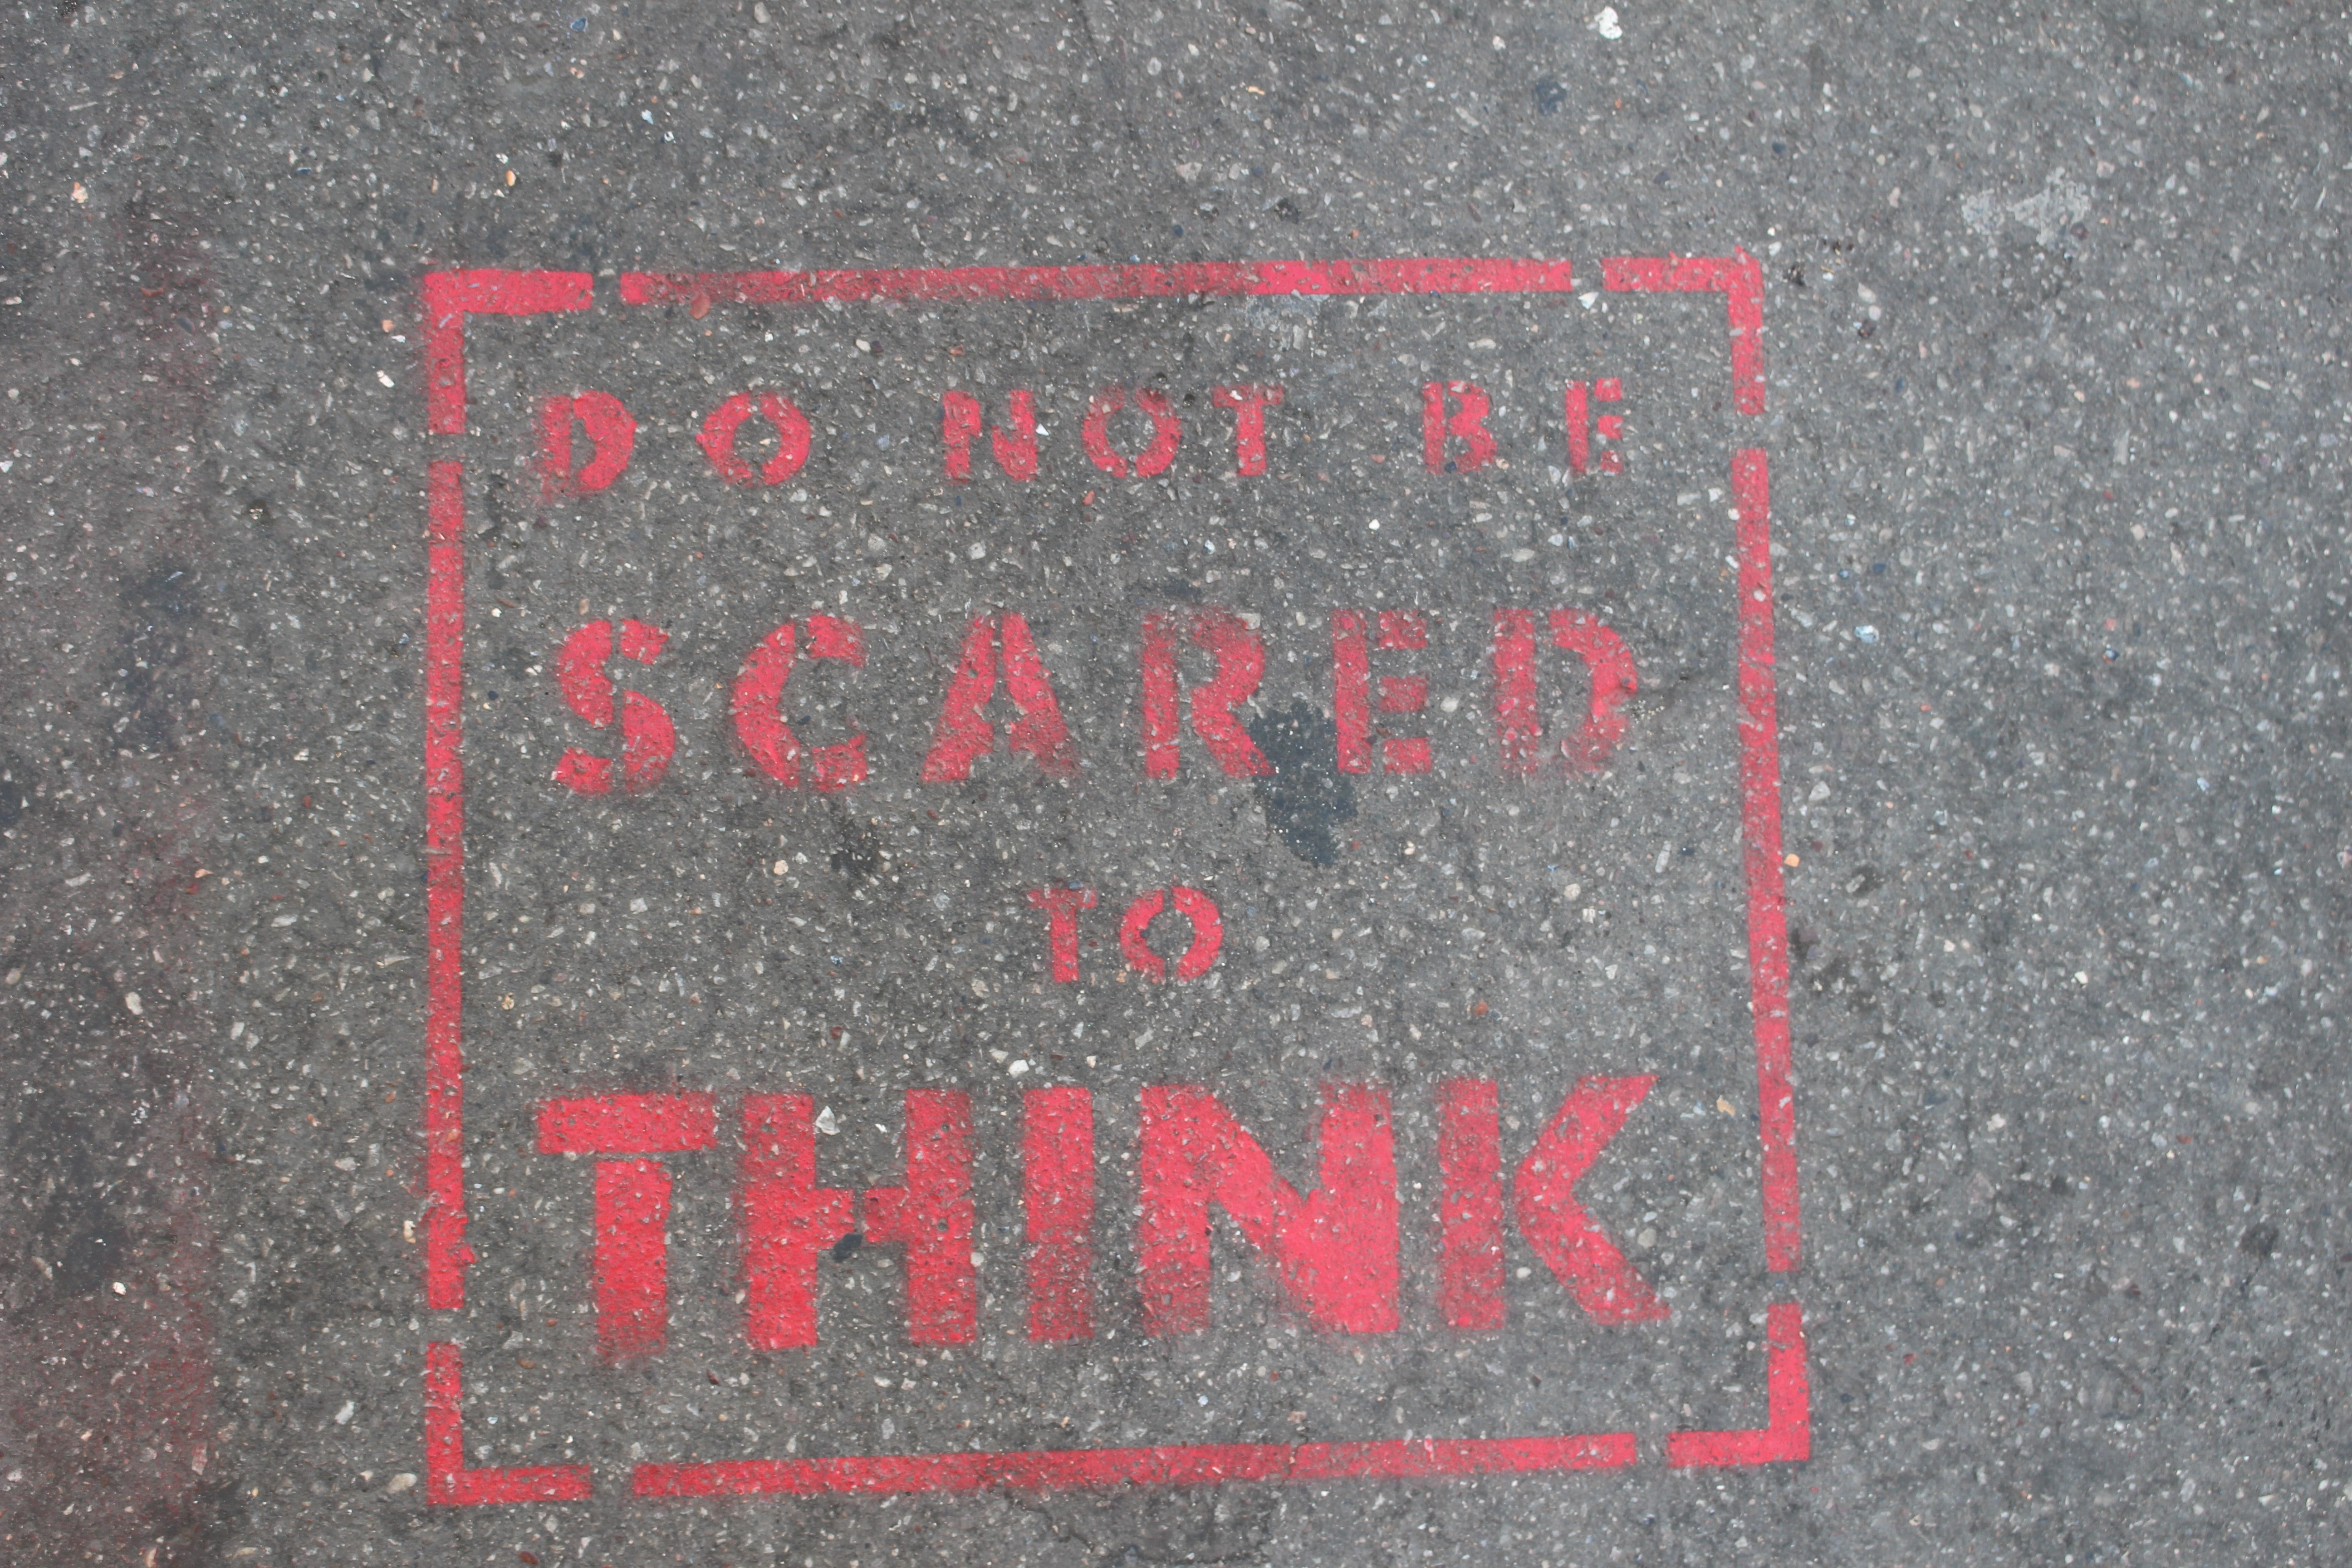 Do not be afraid to think